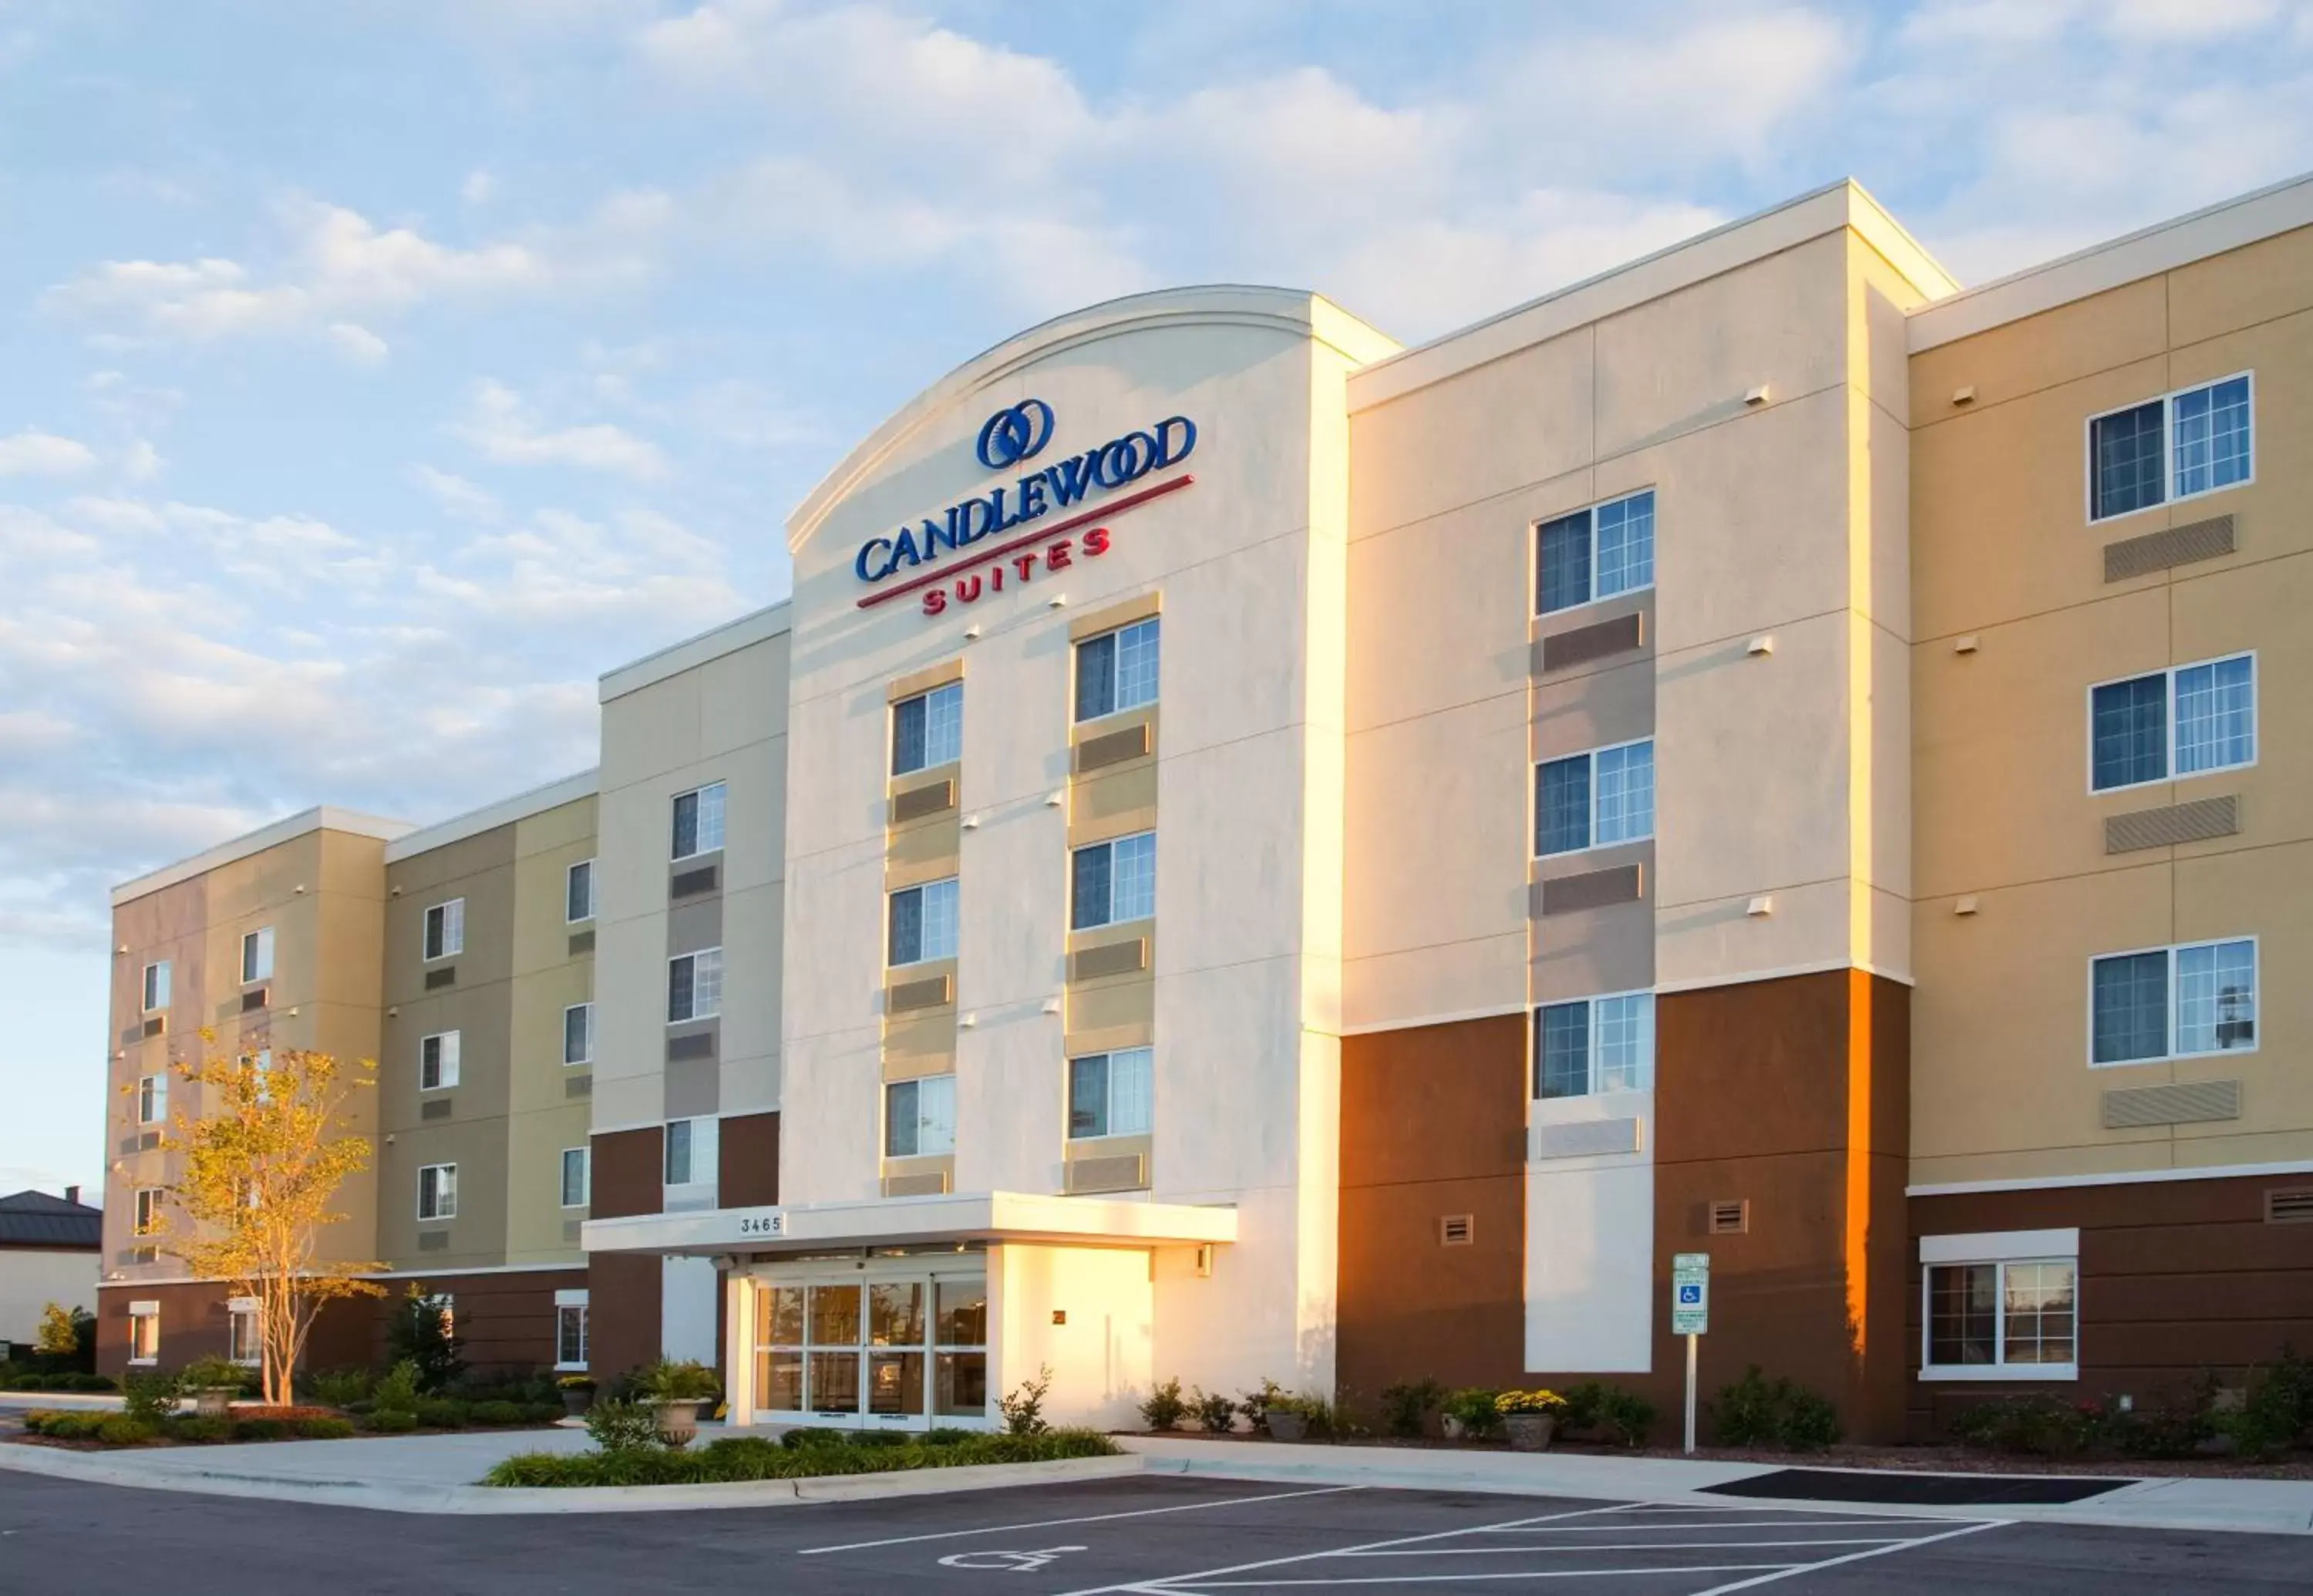 Property Building in Candlewood Suites New Bern, an IHG Hotel